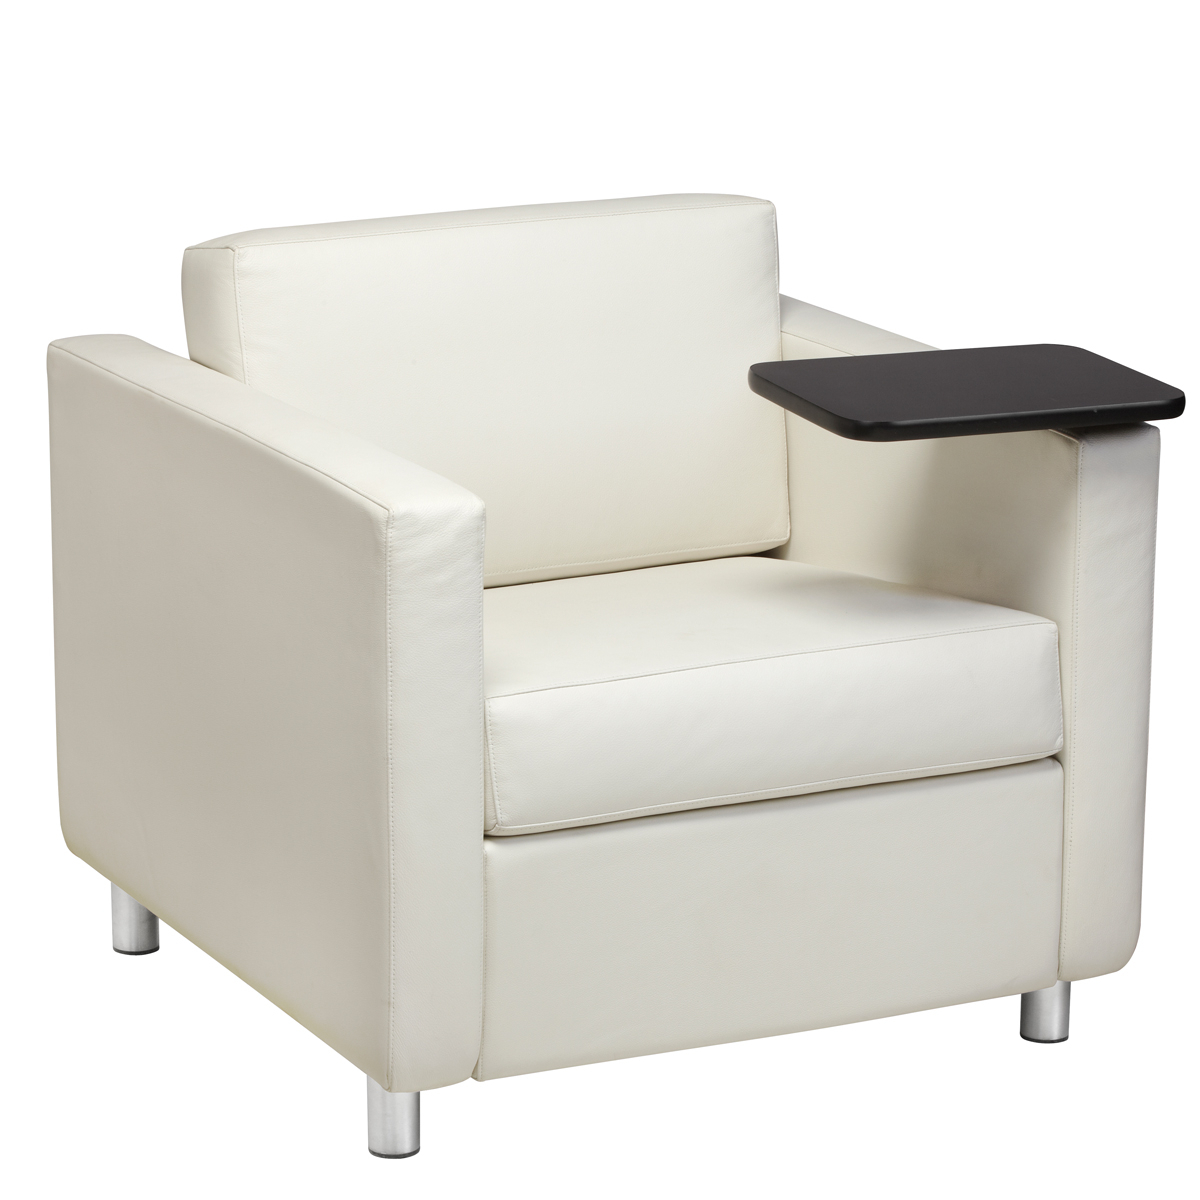 #1201 Danforth Club chair with tablet